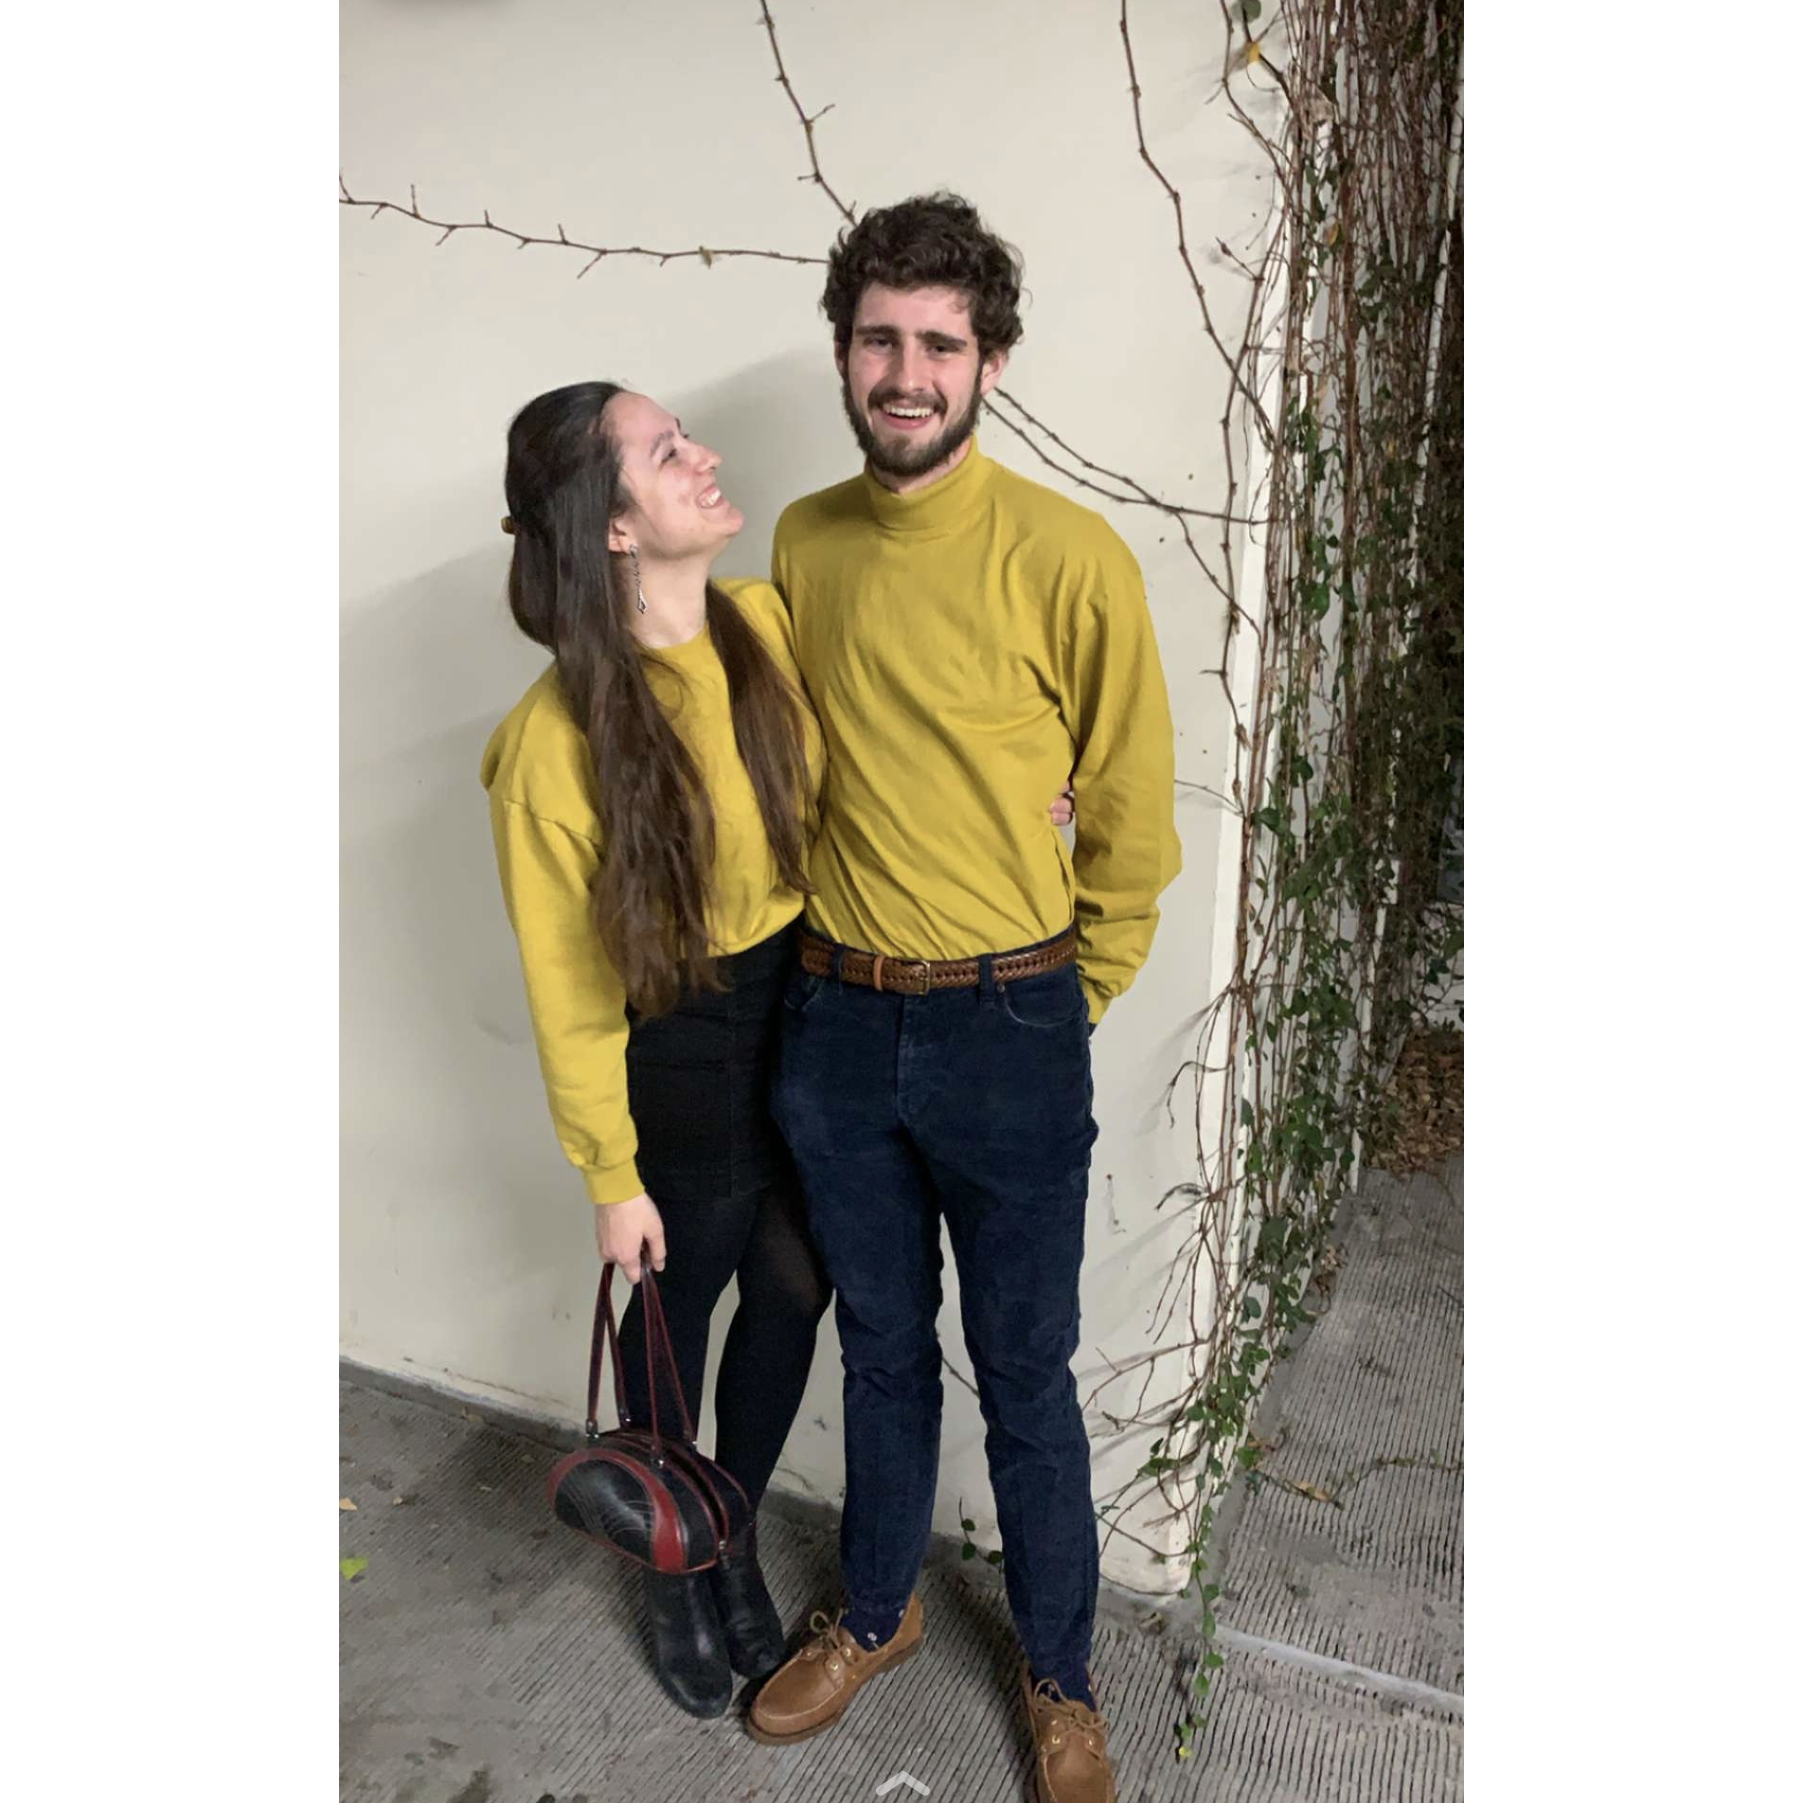 Just a couple of cuties out for a dinner date in our matching outfits. Thanks Hannah for the mustard sweaters!